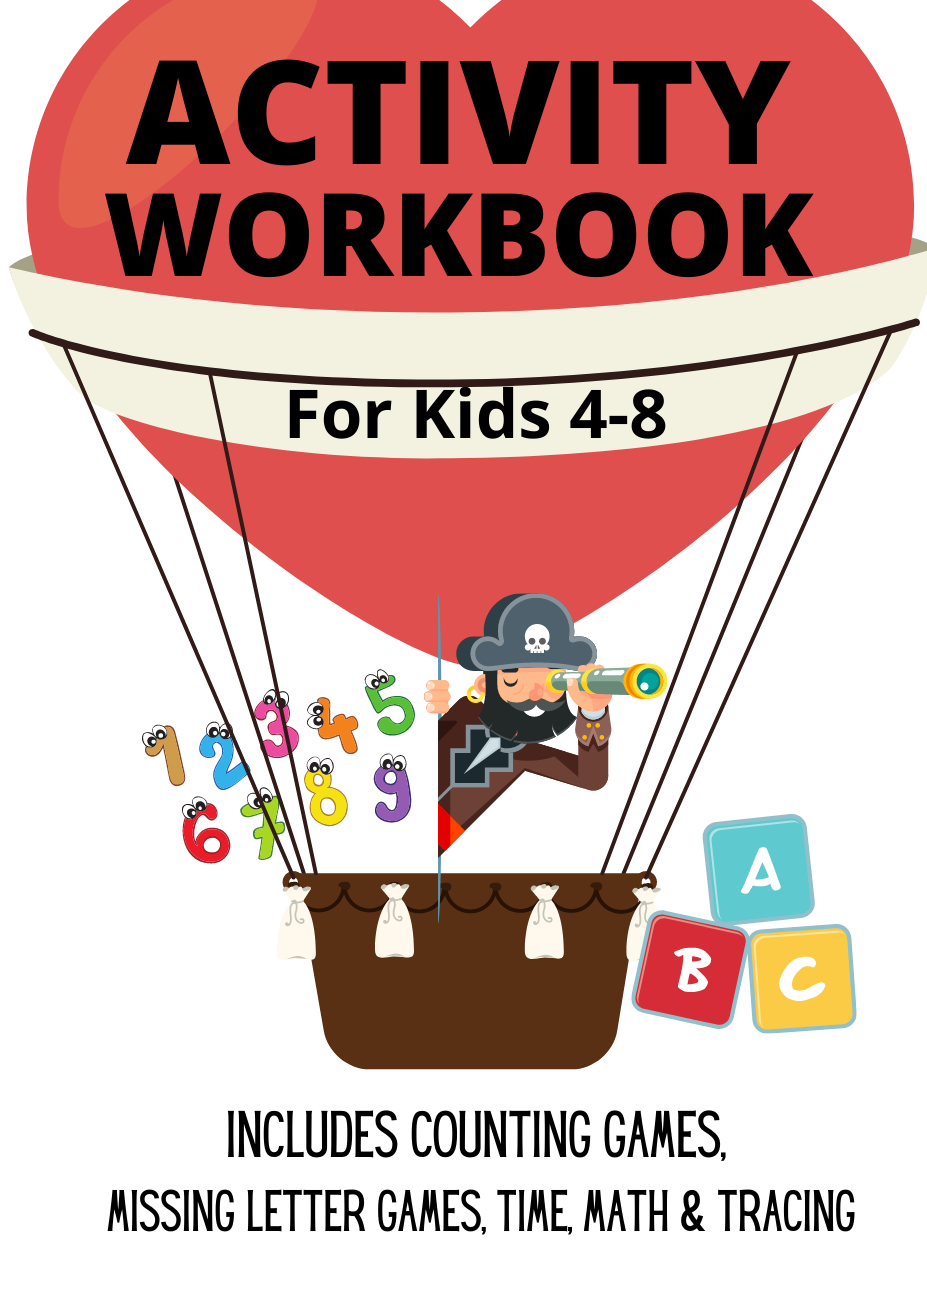 http://www.booksbyheshelow.com/wp-content/uploads/ACTIVITY-WORKBOOK-1.png